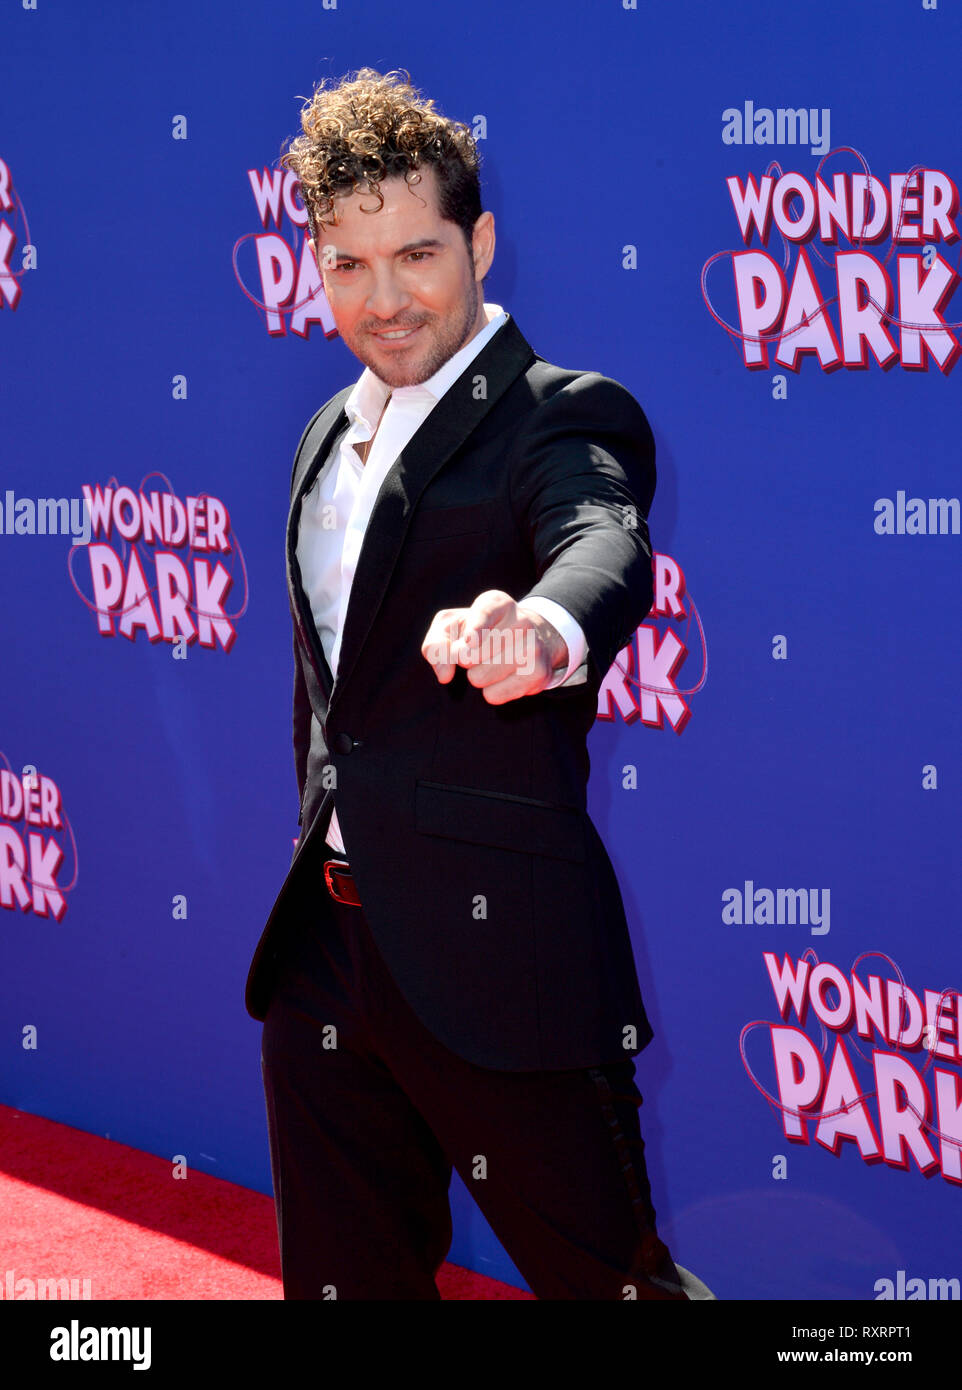 Los Angeles, USA. 10th Mar, 2019. LOS ANGELES, CA. March 10, 2019: David Bisbal at the premiere of 'Wonder Park' at the Regency Village Theatre. Picture Credit: Paul Smith/Alamy Live News Stock Photo